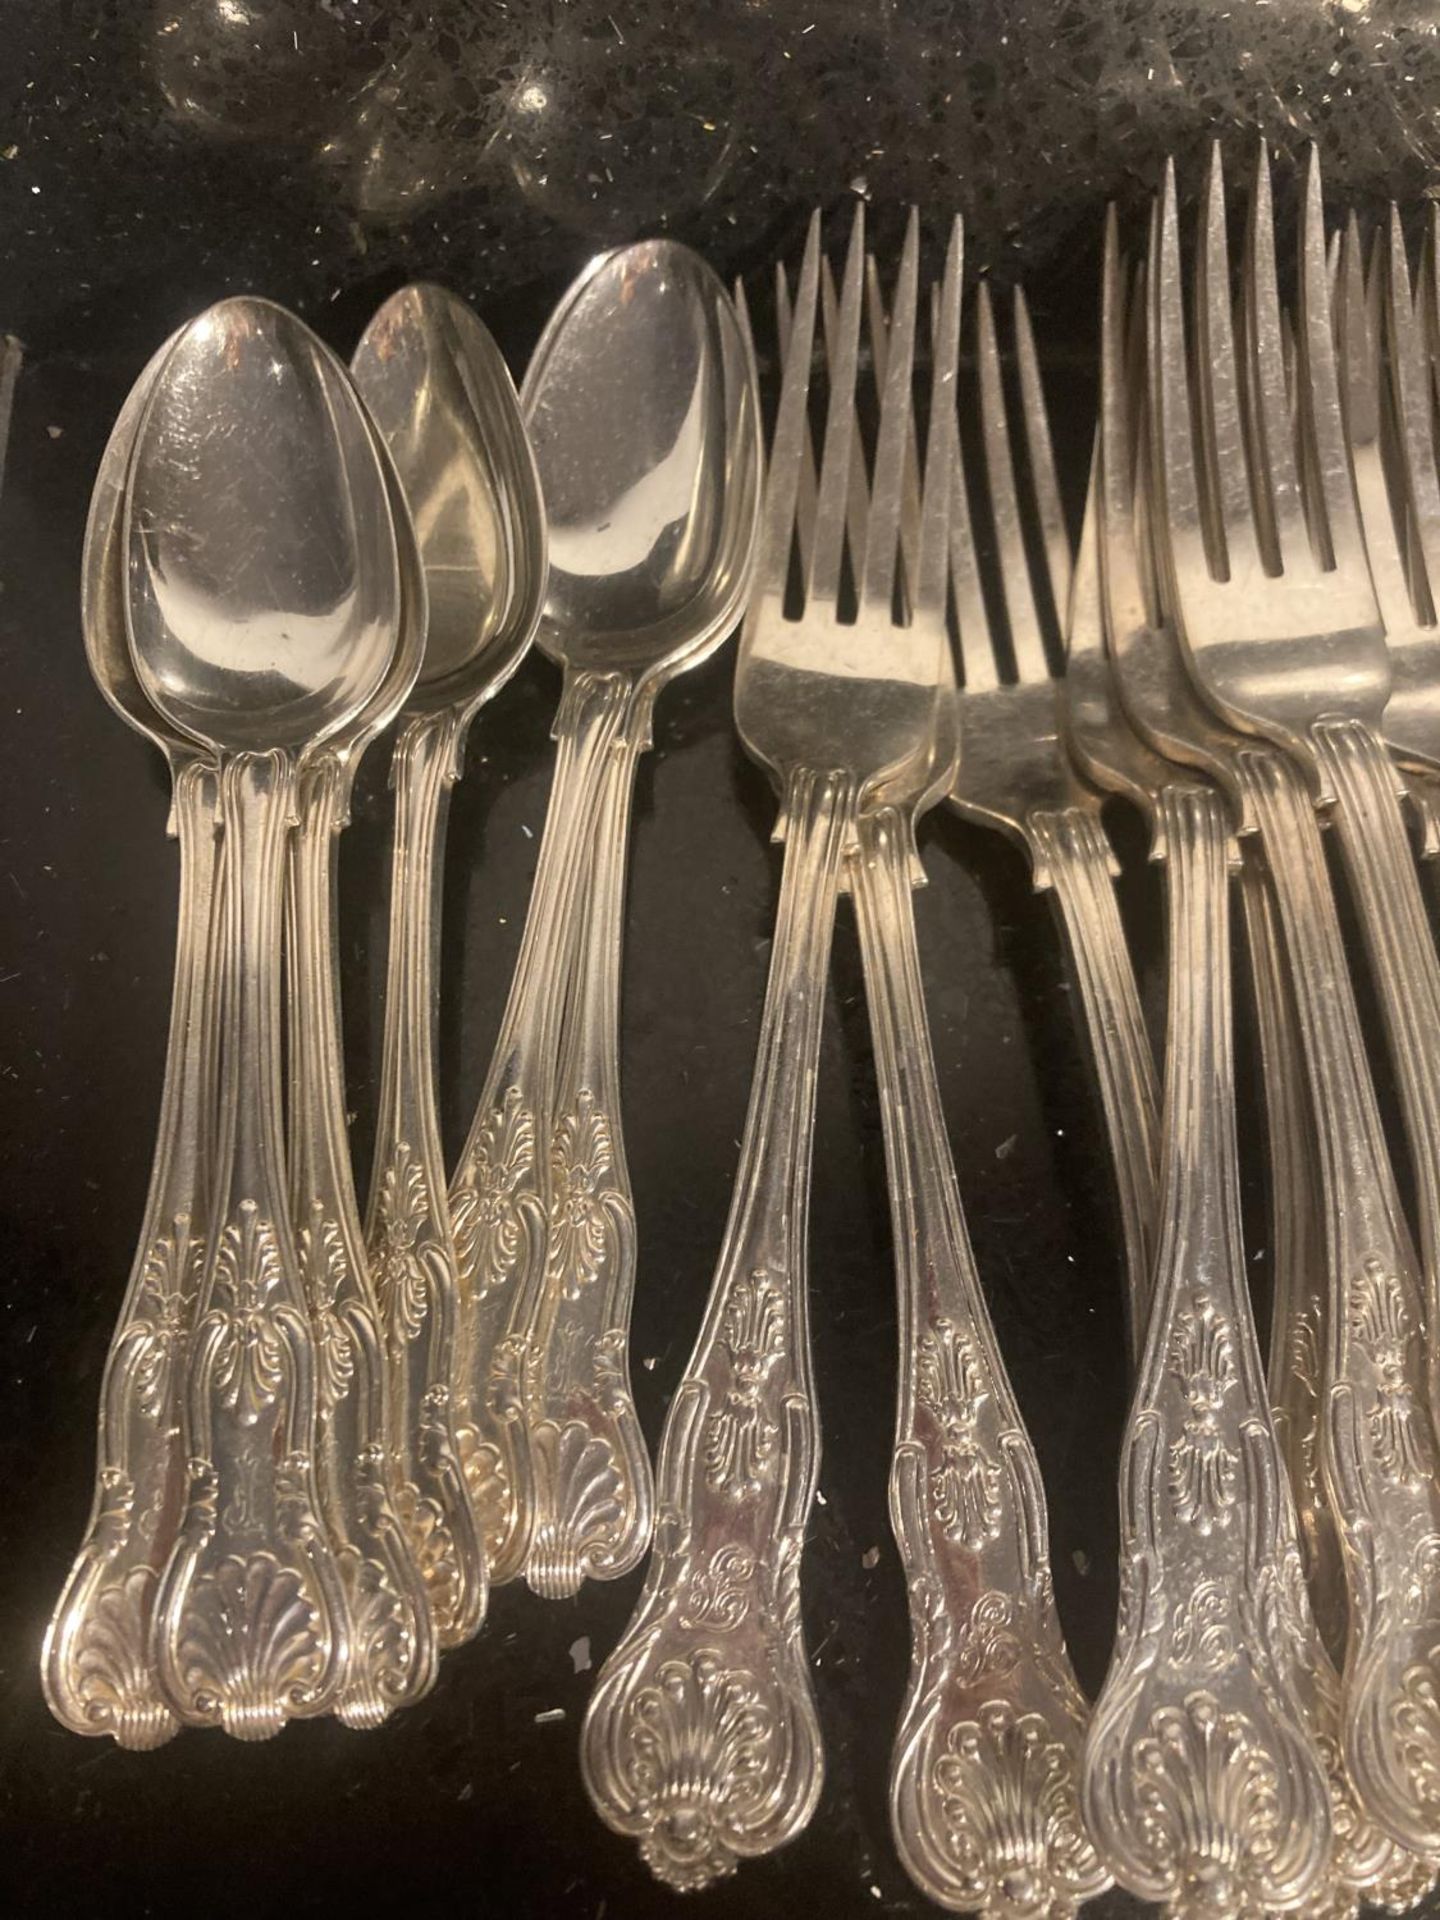 A LARGE QUANTITY OF HALLMARKED SILVER FLATWARE TO INCLUDE FORKS, SPOONS ETC GROSS WEIGHT 2976 GRAMS - Image 2 of 6